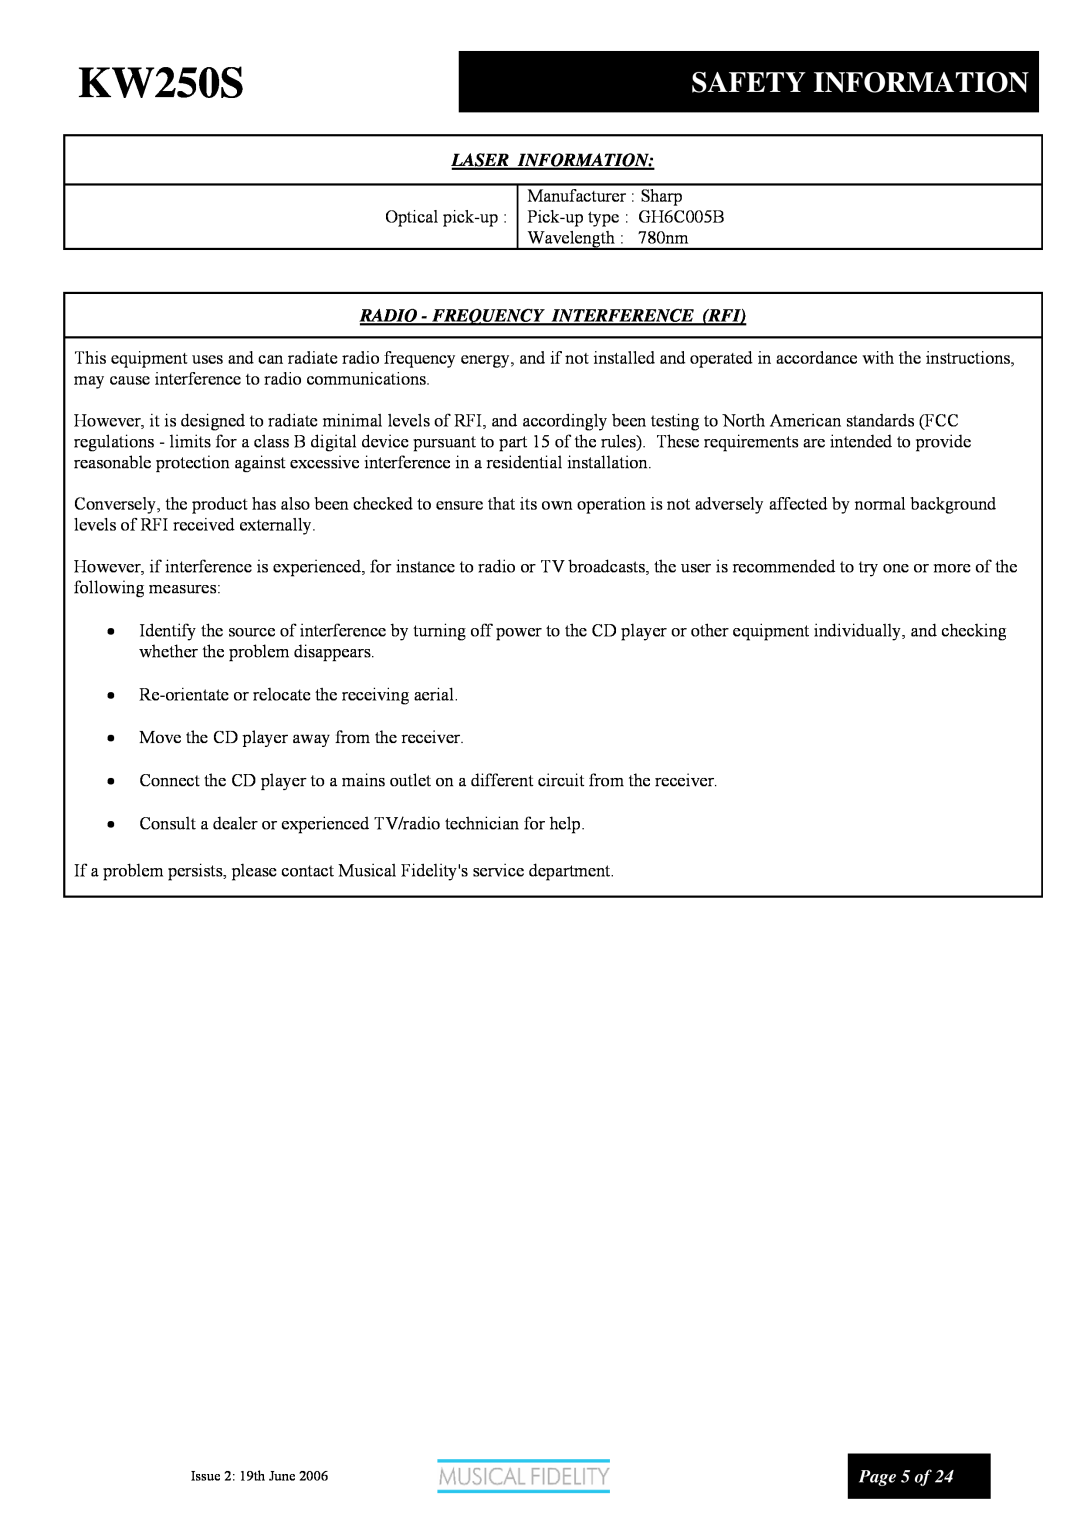 Musical Fidelity KW250S manual Safety Information, Laser Information, Radio - Frequency Interference Rfi, Page 5 of 